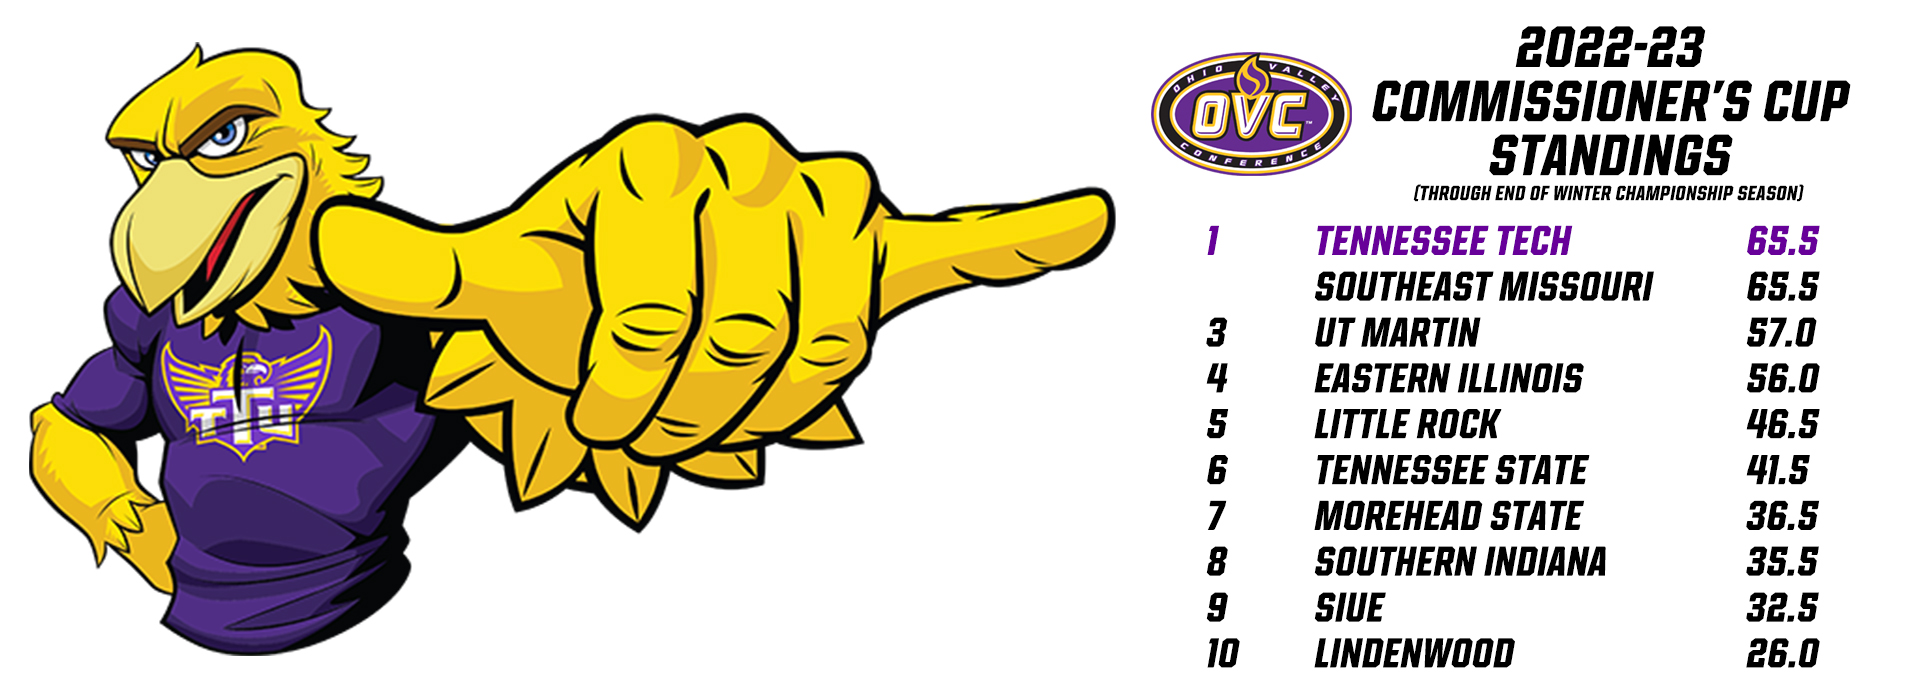 Tennessee Tech tied for lead in OVC Commissioner's Cup standings following end of winter championship season